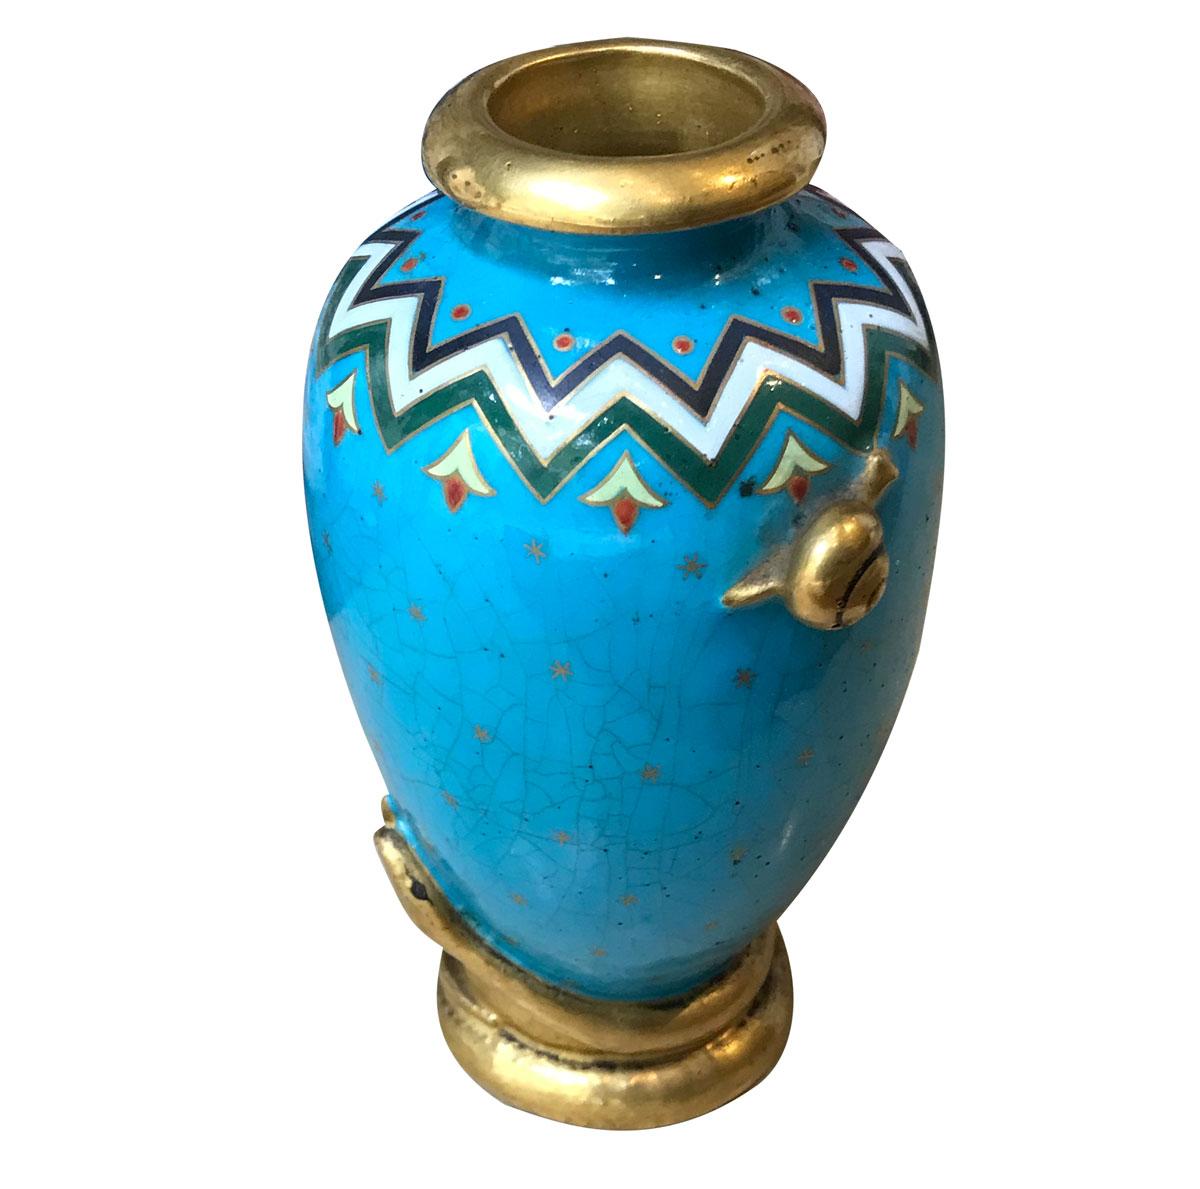 Elegant and refined small Japanese-style porcelain vase. Aesthetic Movement piece with a blue background and colorful geometric patterns typical of Christopher Dresser's designs enhanced with small stars all over the vase.
It is decorated with two